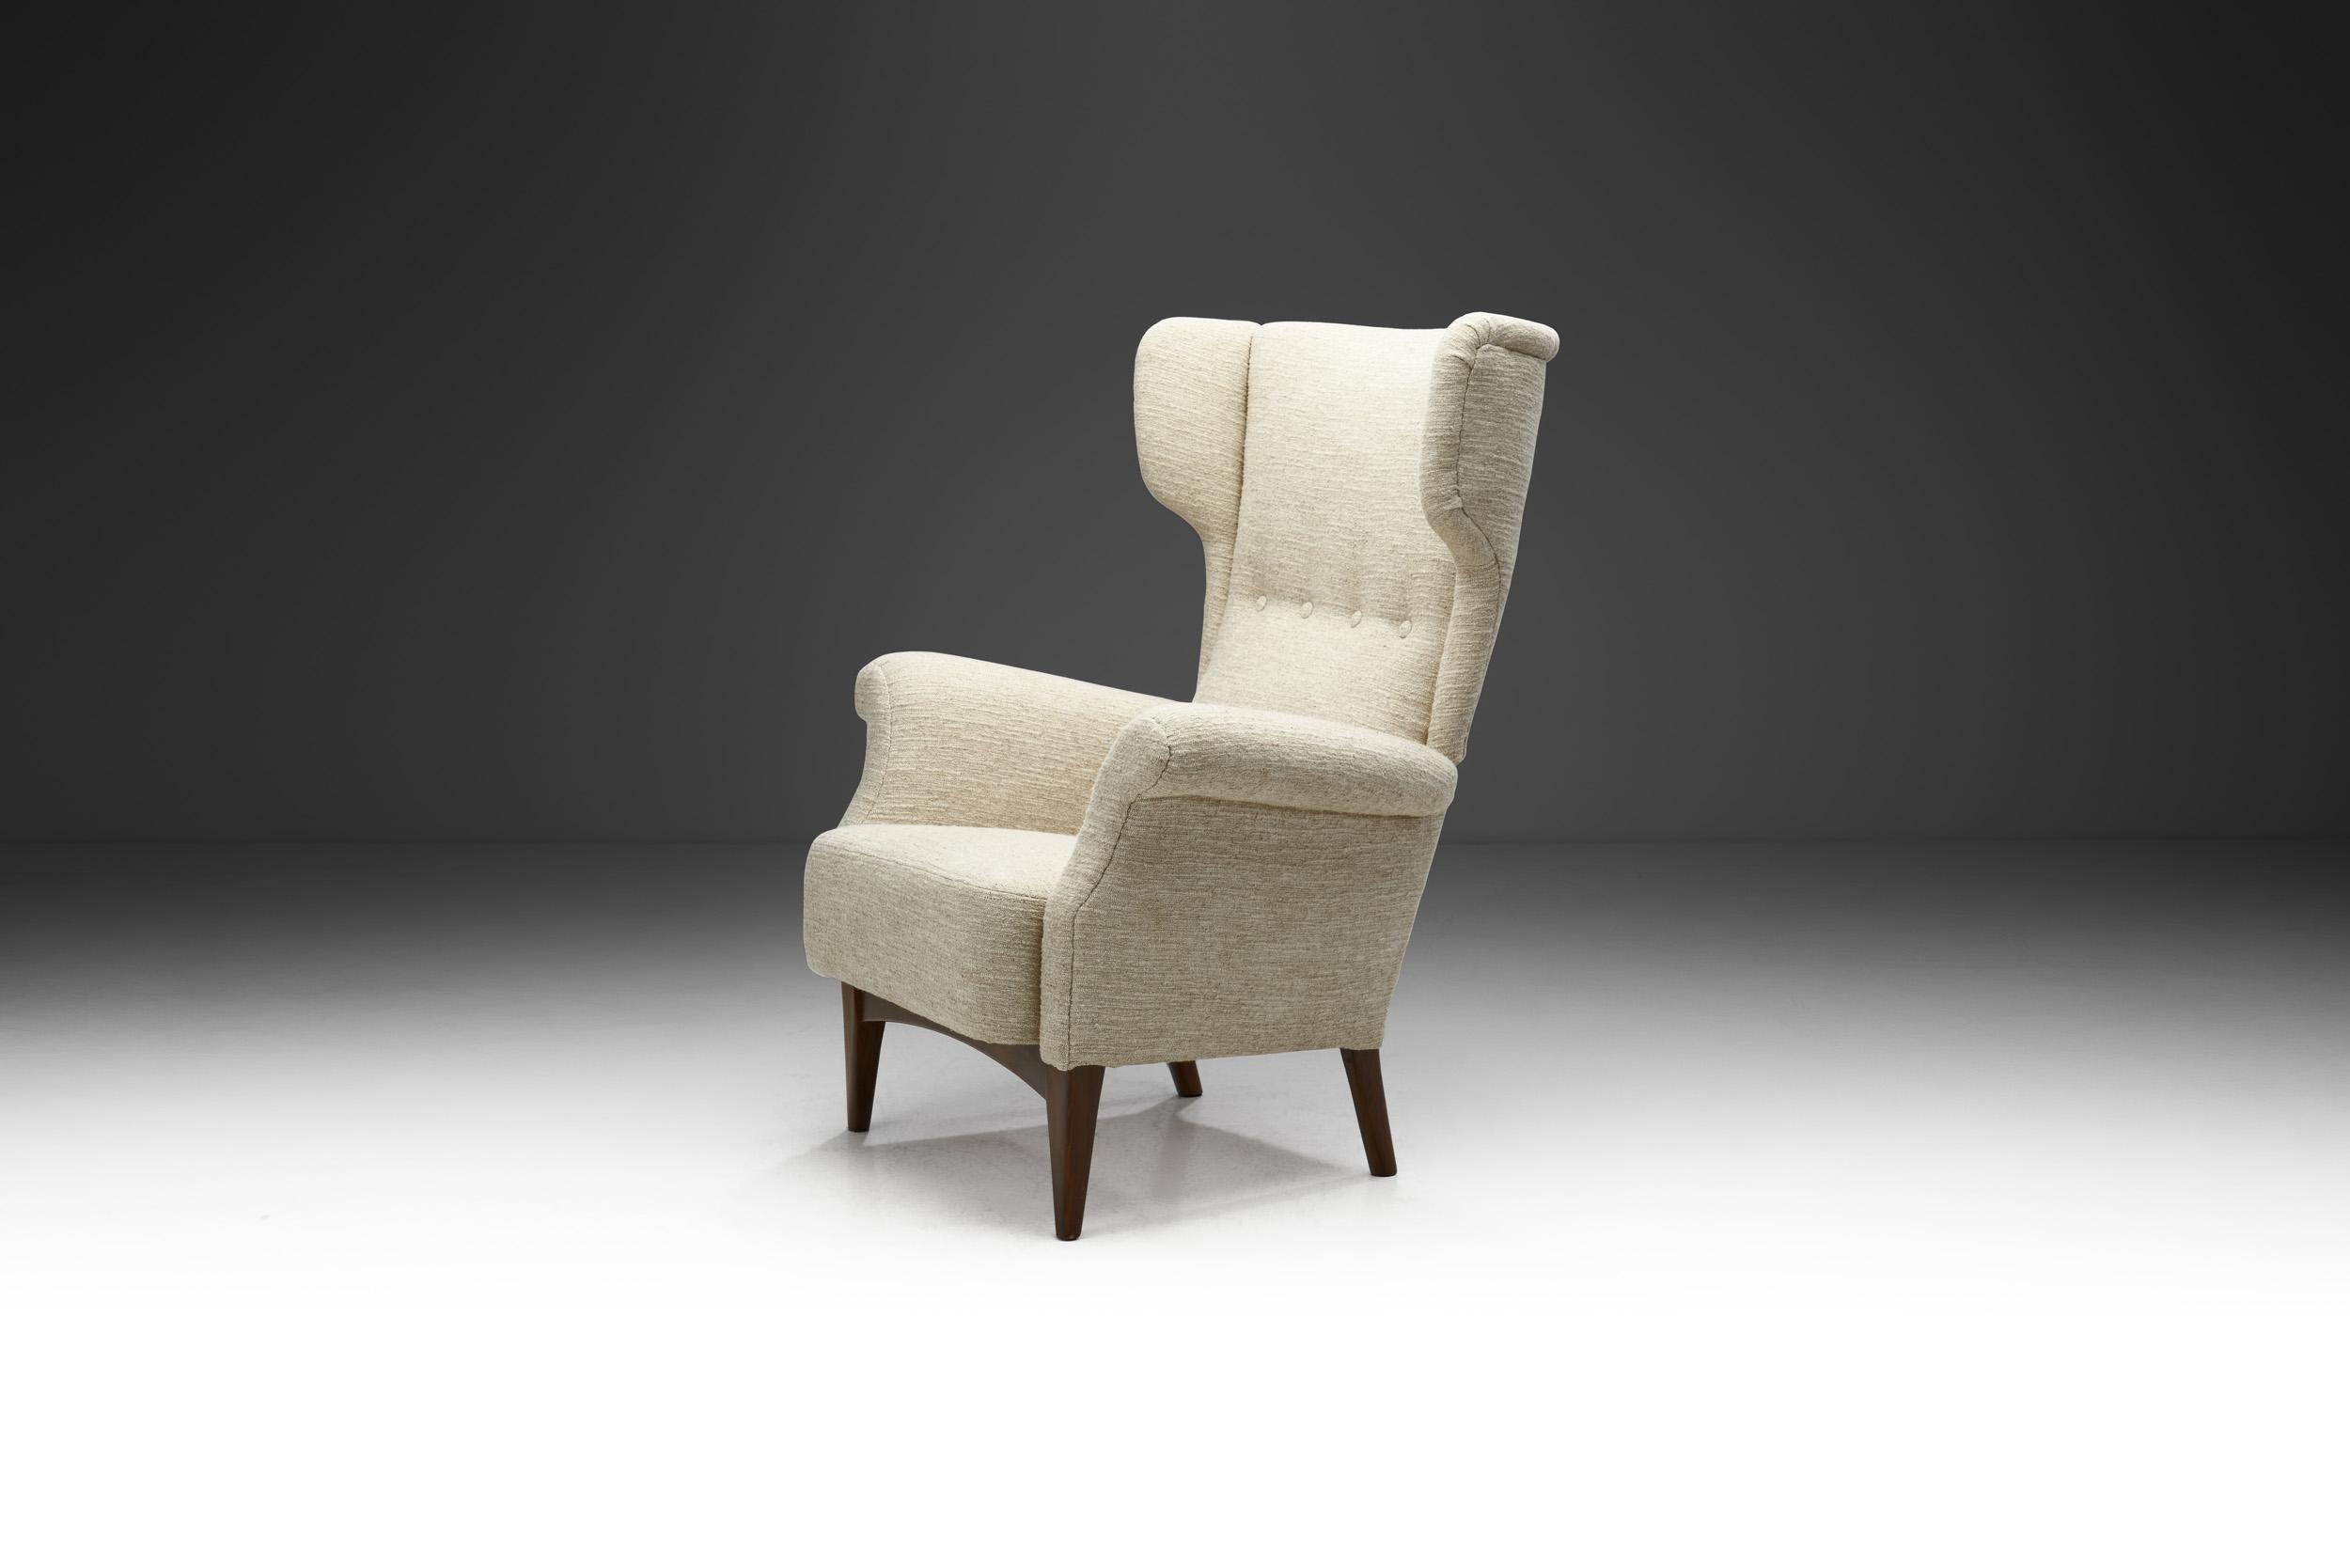 Throughout Scandinavia, there's a long history of pride in craftsmanship which is especially true of Denmark and one of its most reputable furniture makers Fritz Hansen. This beautiful wingback chair is an exceptional flagbearer of Danish